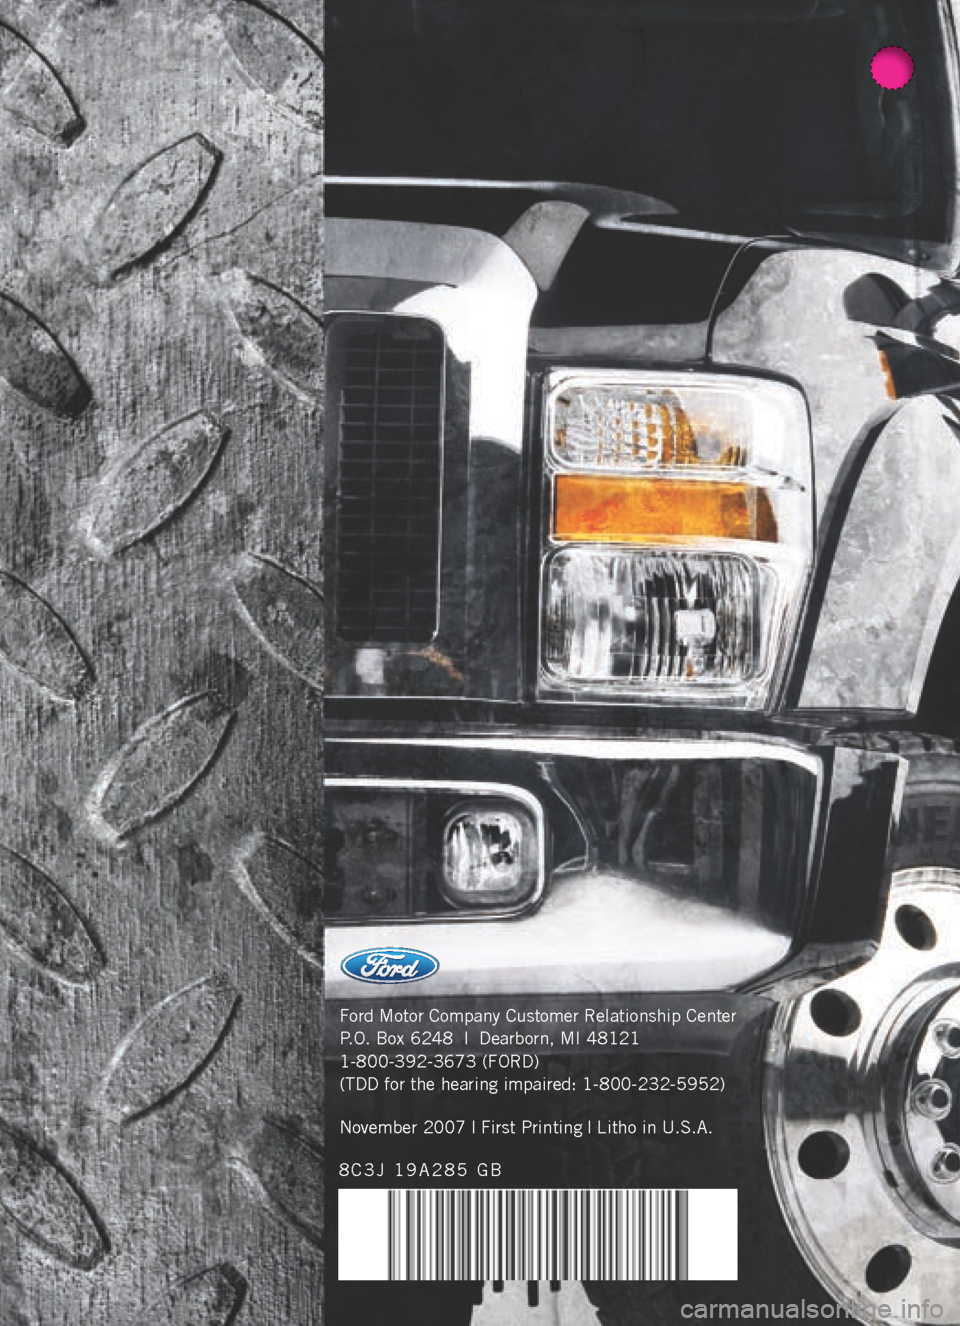 FORD SUPER DUTY 2008 2.G Owner Guide Supplement Ford Motor Company Customer Relationship Center
P.O. Box 6248  |  Dearborn, MI 48121
1-800-392-3673 (FORD)
(TDD for the hearing impaired: 1-800-232-5952)
8C3J 19A285 GBNovember 2007 | First Printing |